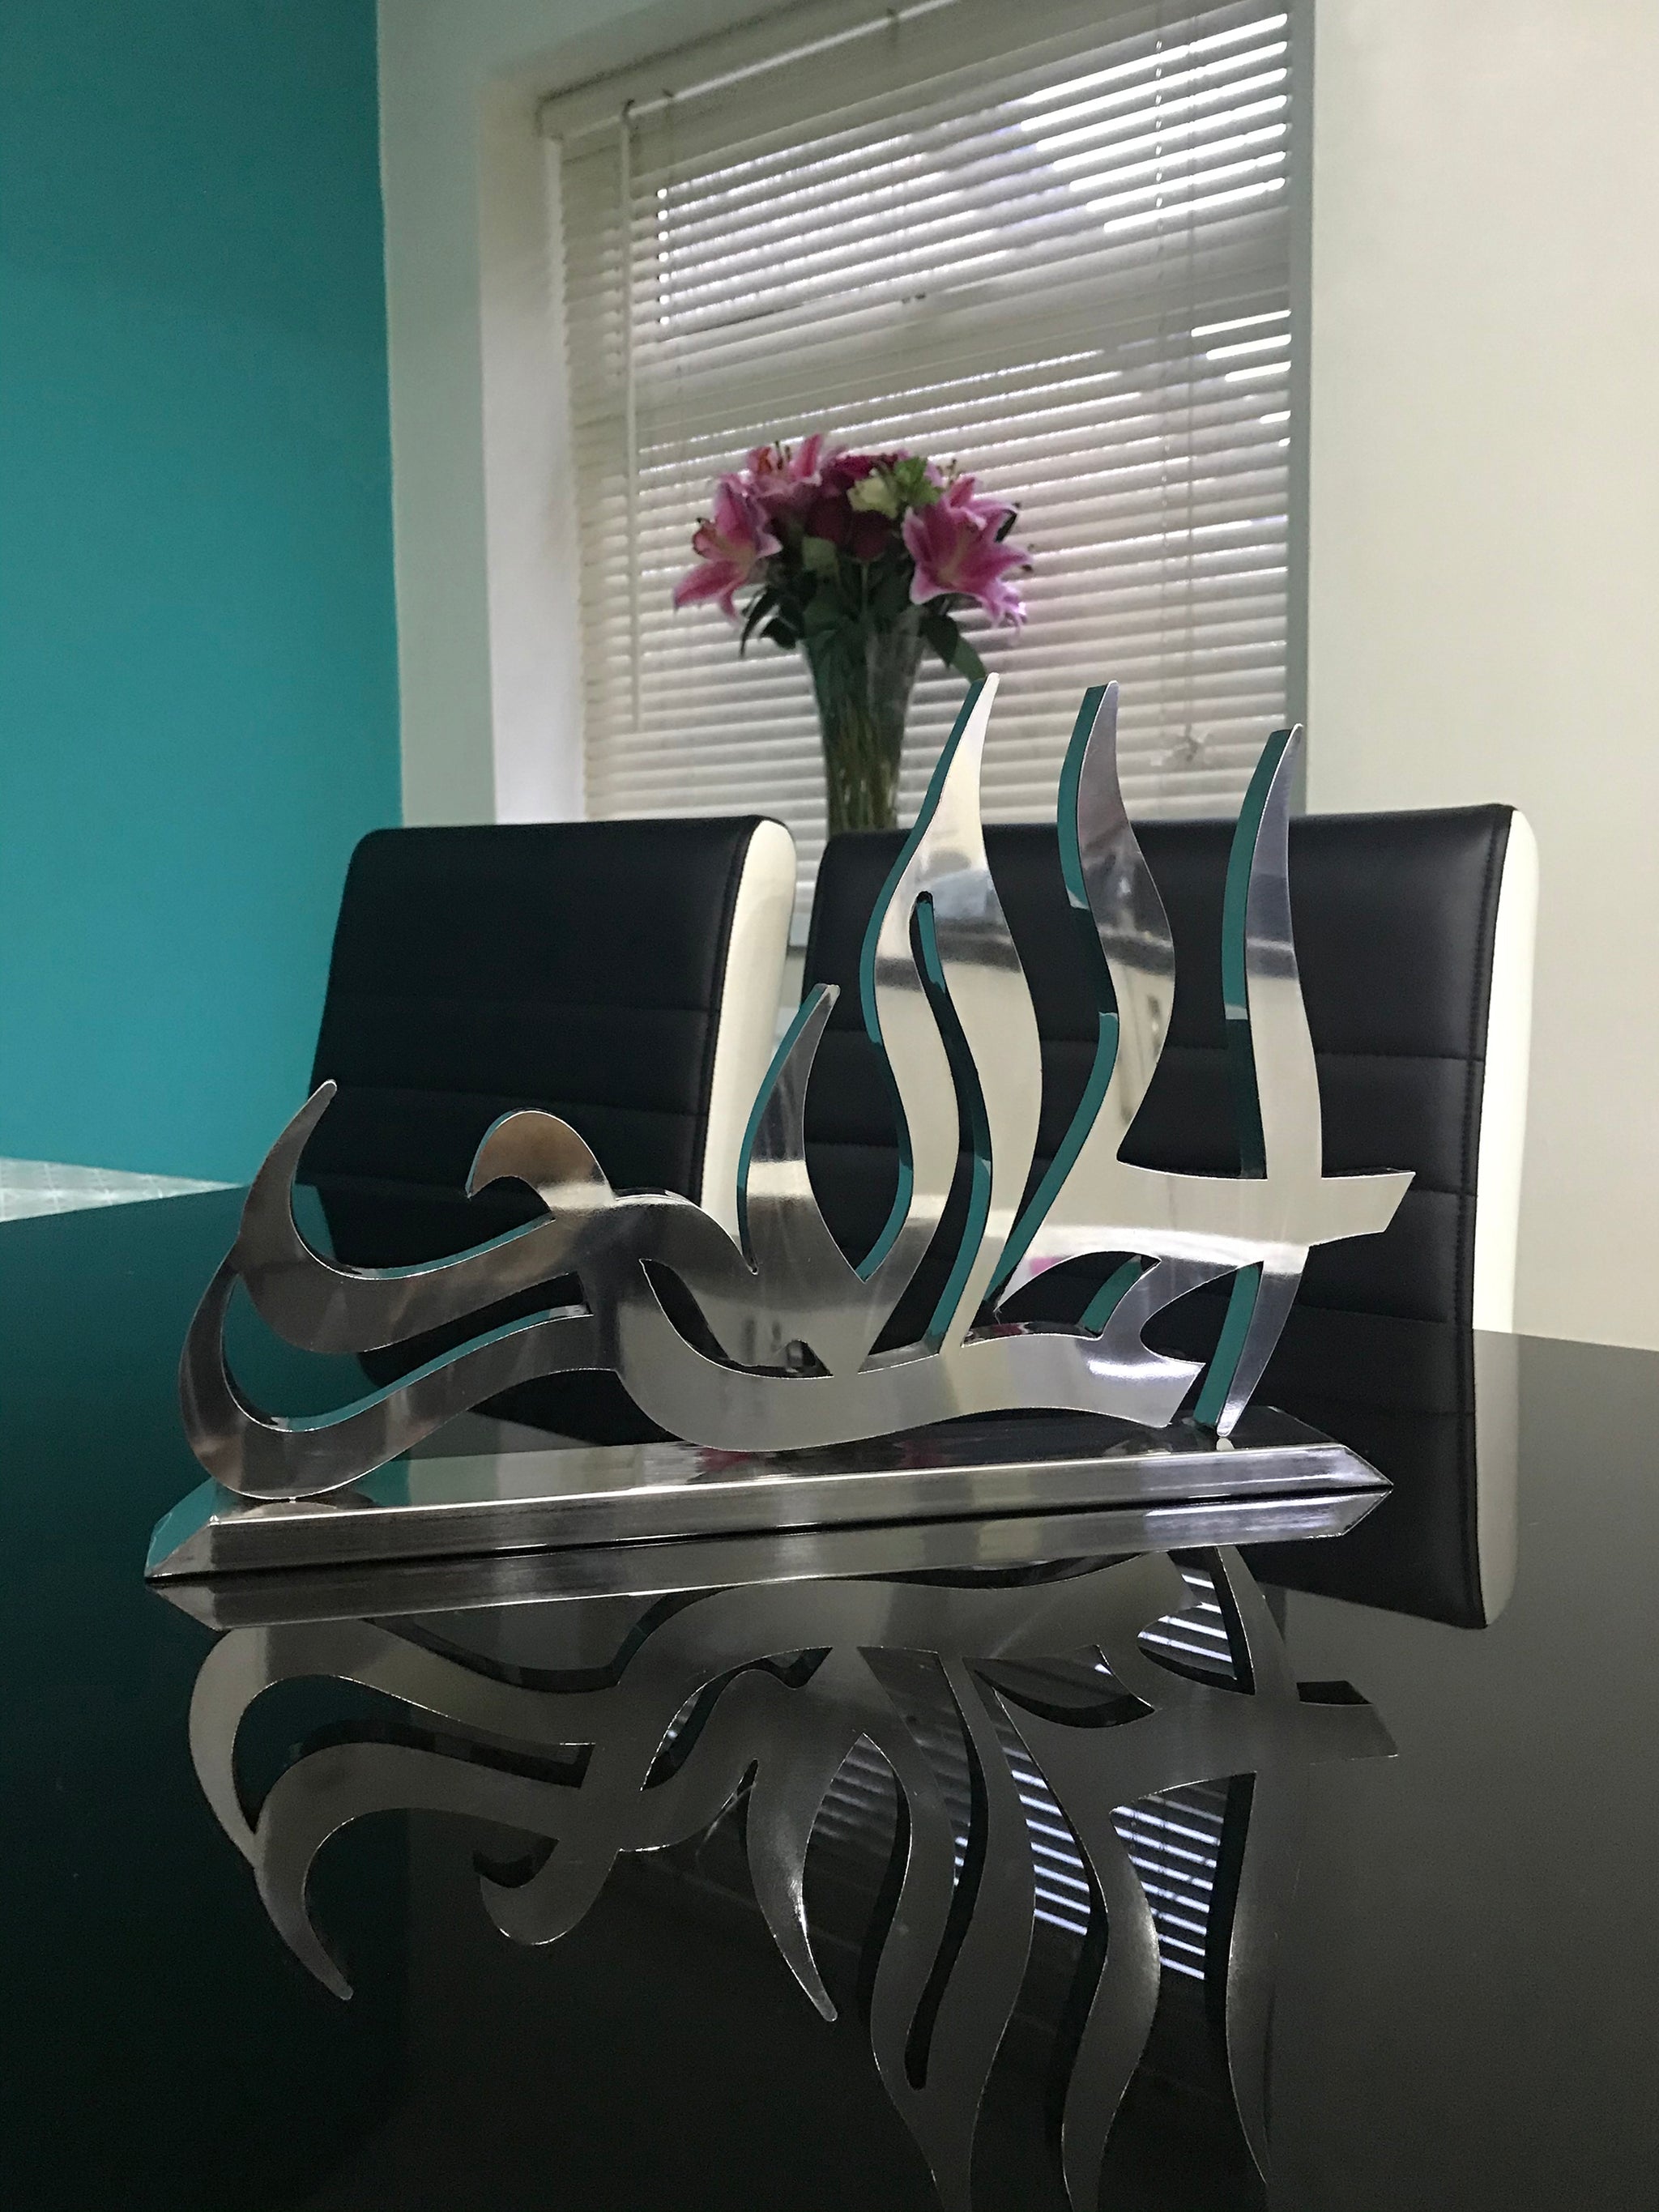 Alhamdulillah Table Decor 3D Stainless Steel Islamic Calligraphy